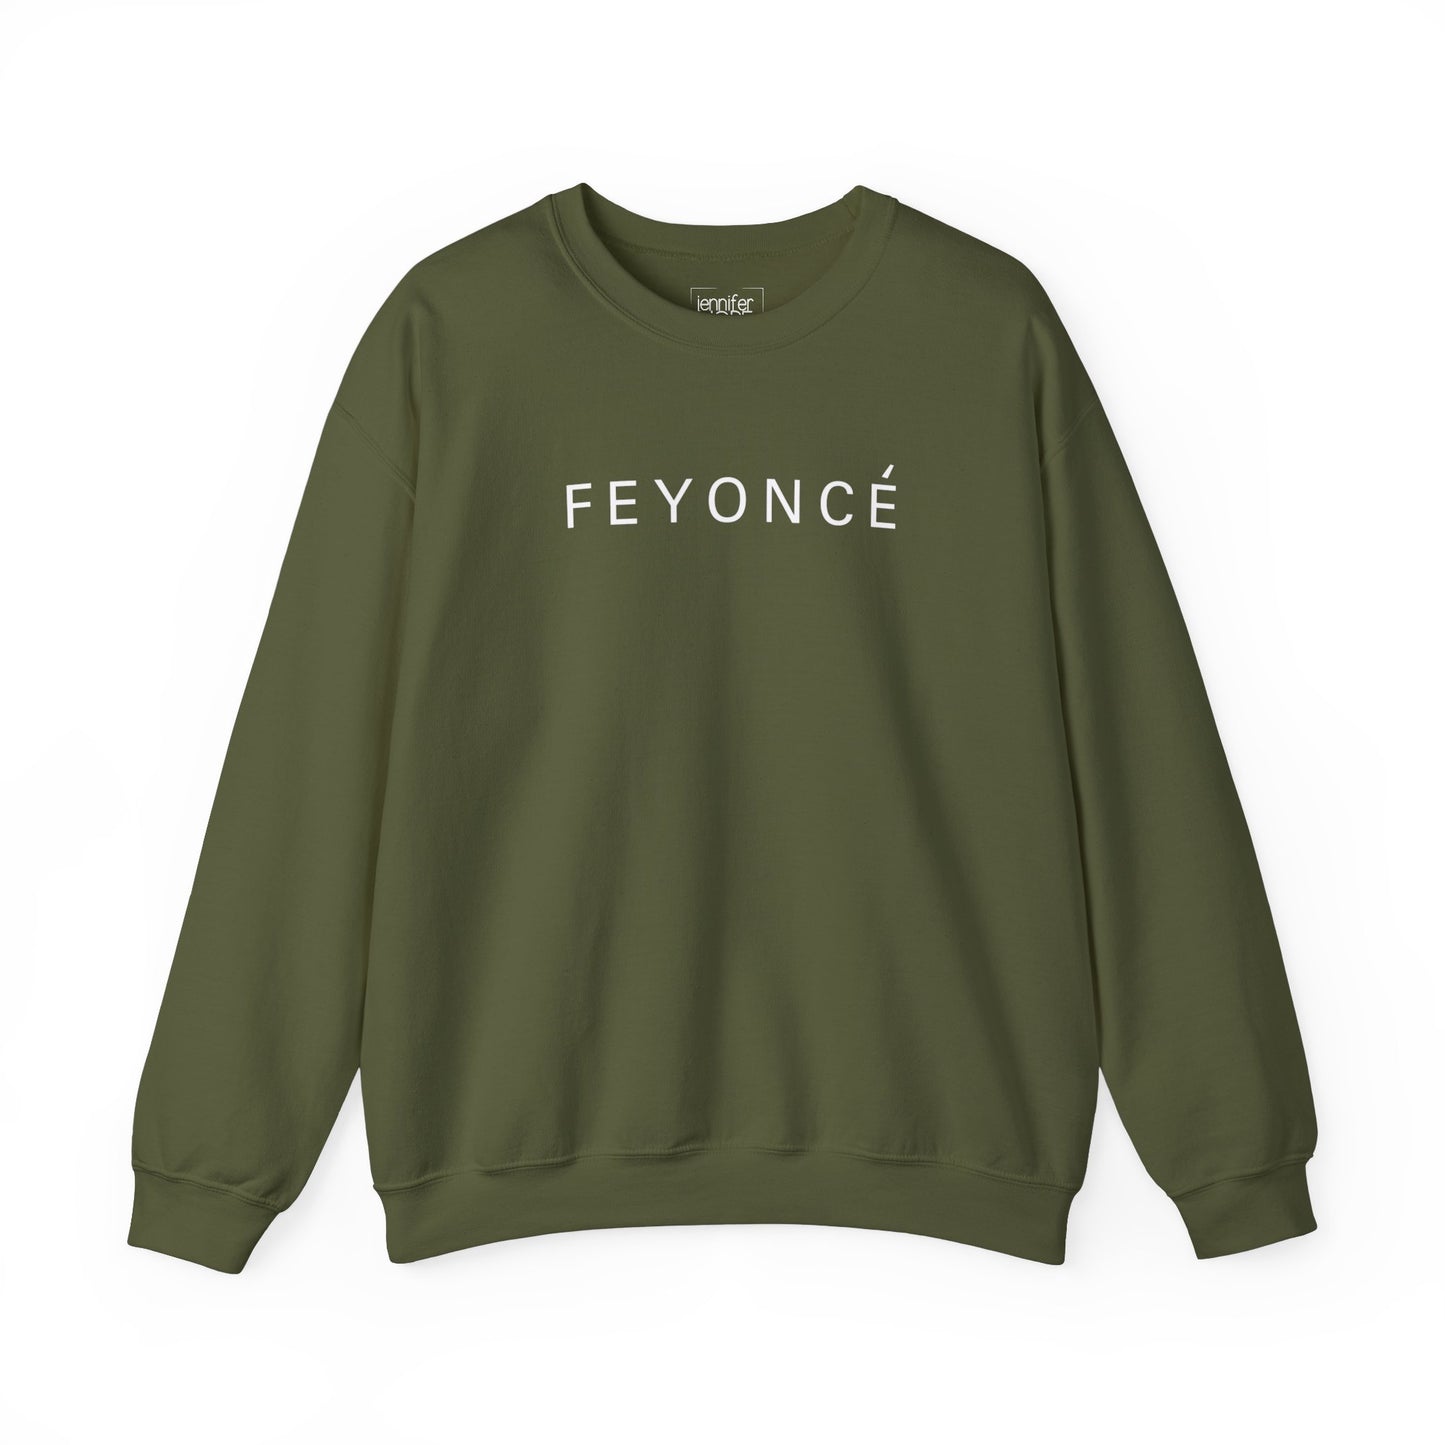 Feyonce' Crewneck Customizable Bridal Sweatshirt Personalize it with your new Last name on the back.